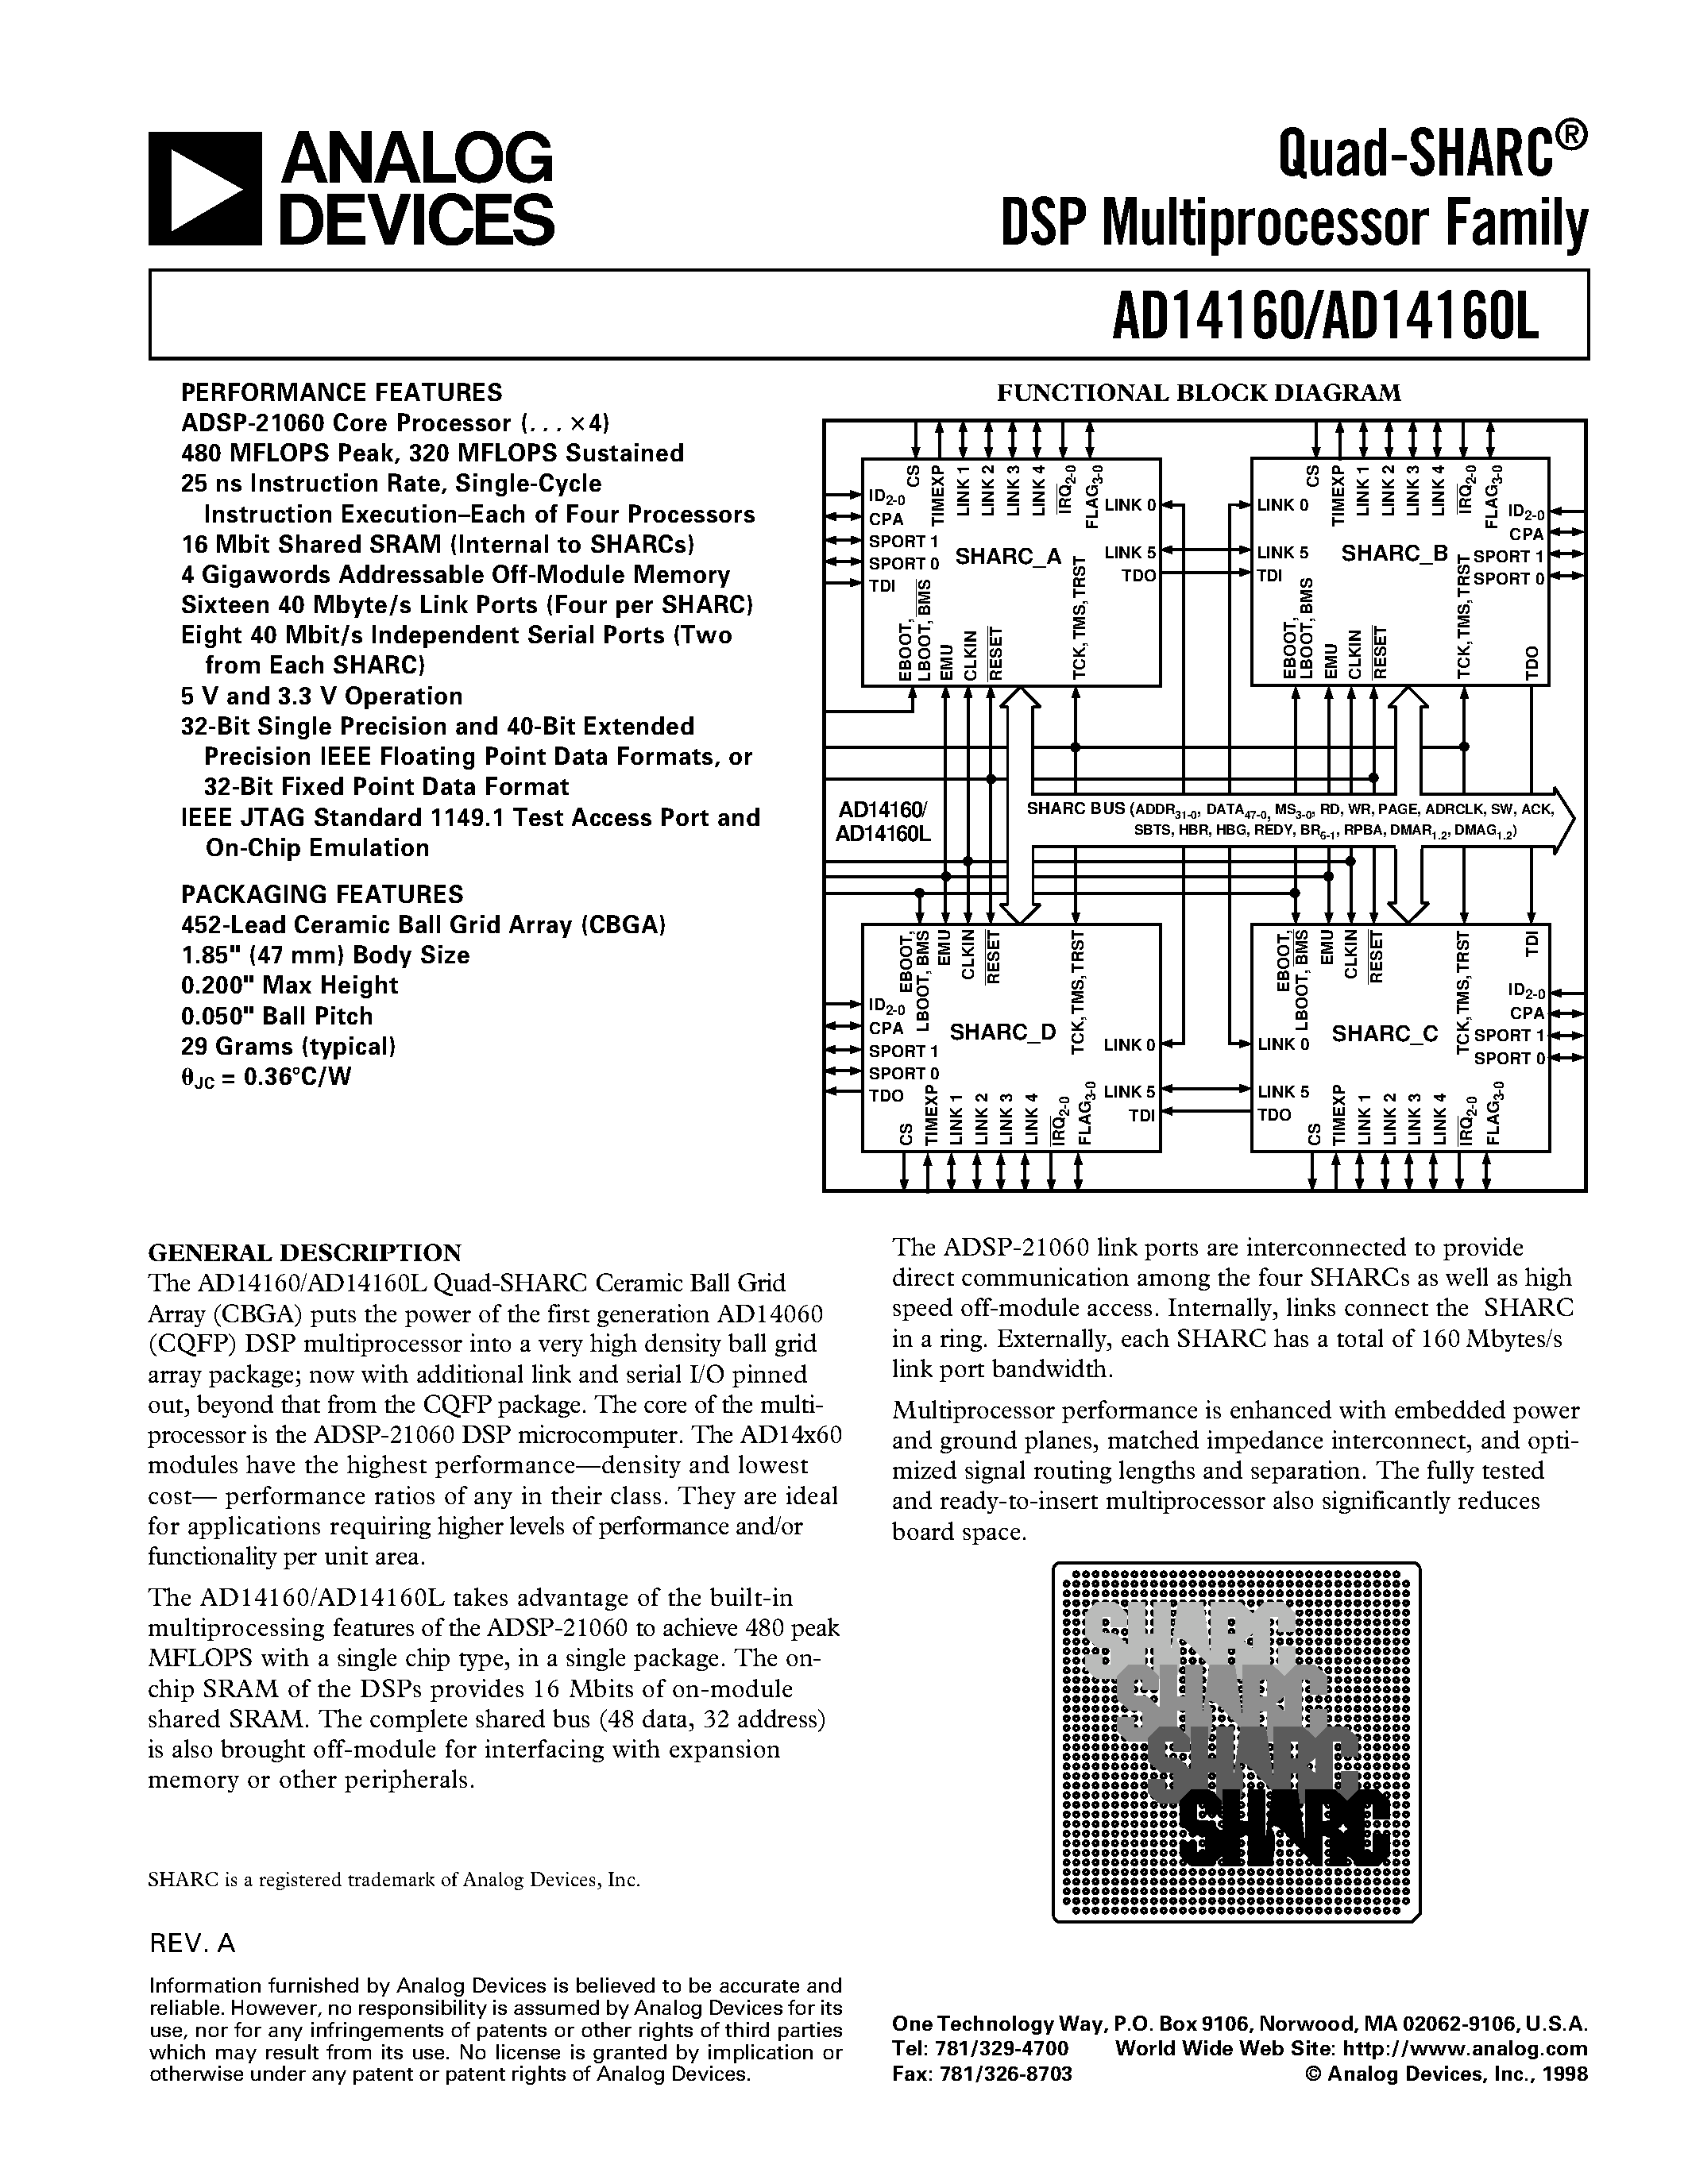 Datasheet AD14160 - Quad-SHARC DSP Multiprocessor Family page 1